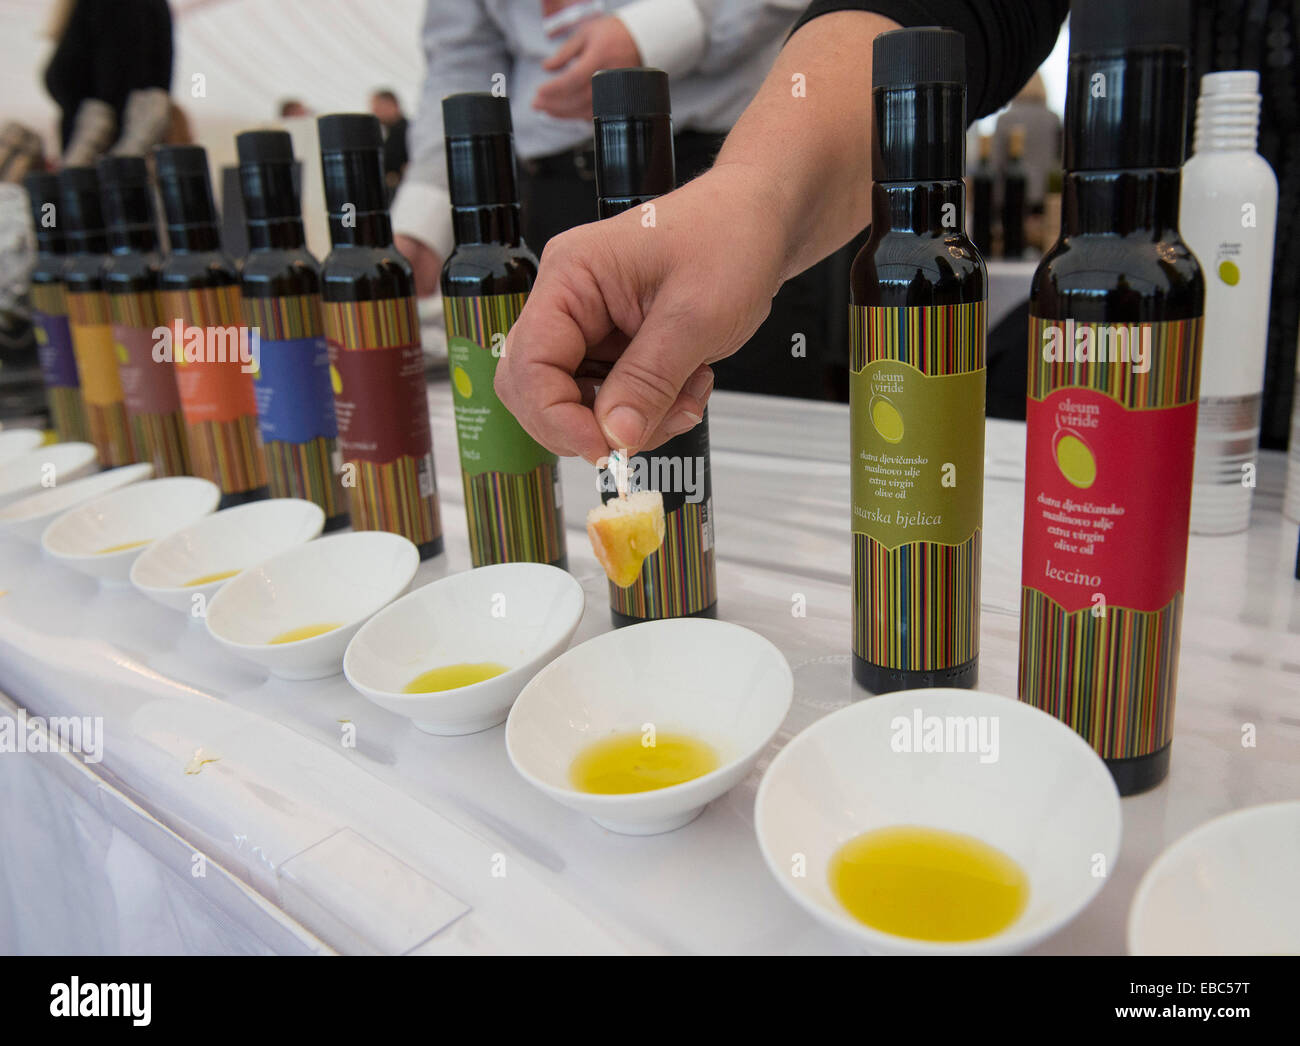 Zagreb, Croatia. 28th Nov, 2014. Visitors taste olive oil during the 9th Zagreb VINOcom-International Festival of Wine and Culinary Art at the Esplanade hotel in Zagreb, capital of Croatia, Nov. 28, 2014. The two-day wine and food festival kicked off here on Friday with participation of more than 300 wine and food exhibitors from Croatia and nearby region. © Miso Lisanin/Xinhua/Alamy Live News Stock Photo